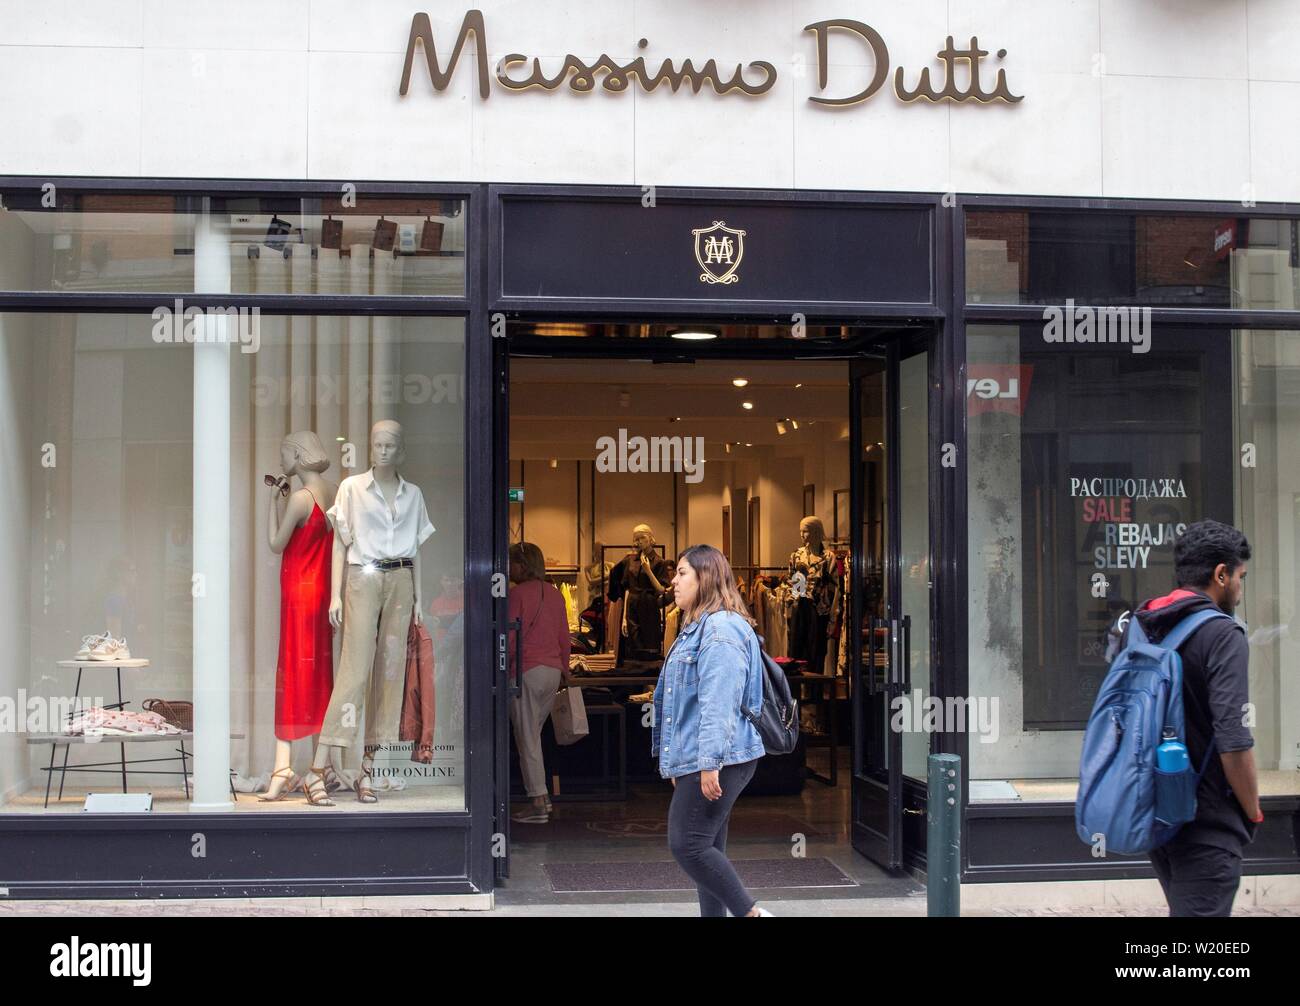 Massimo Dutti High Resolution Stock Photography and Images - Alamy